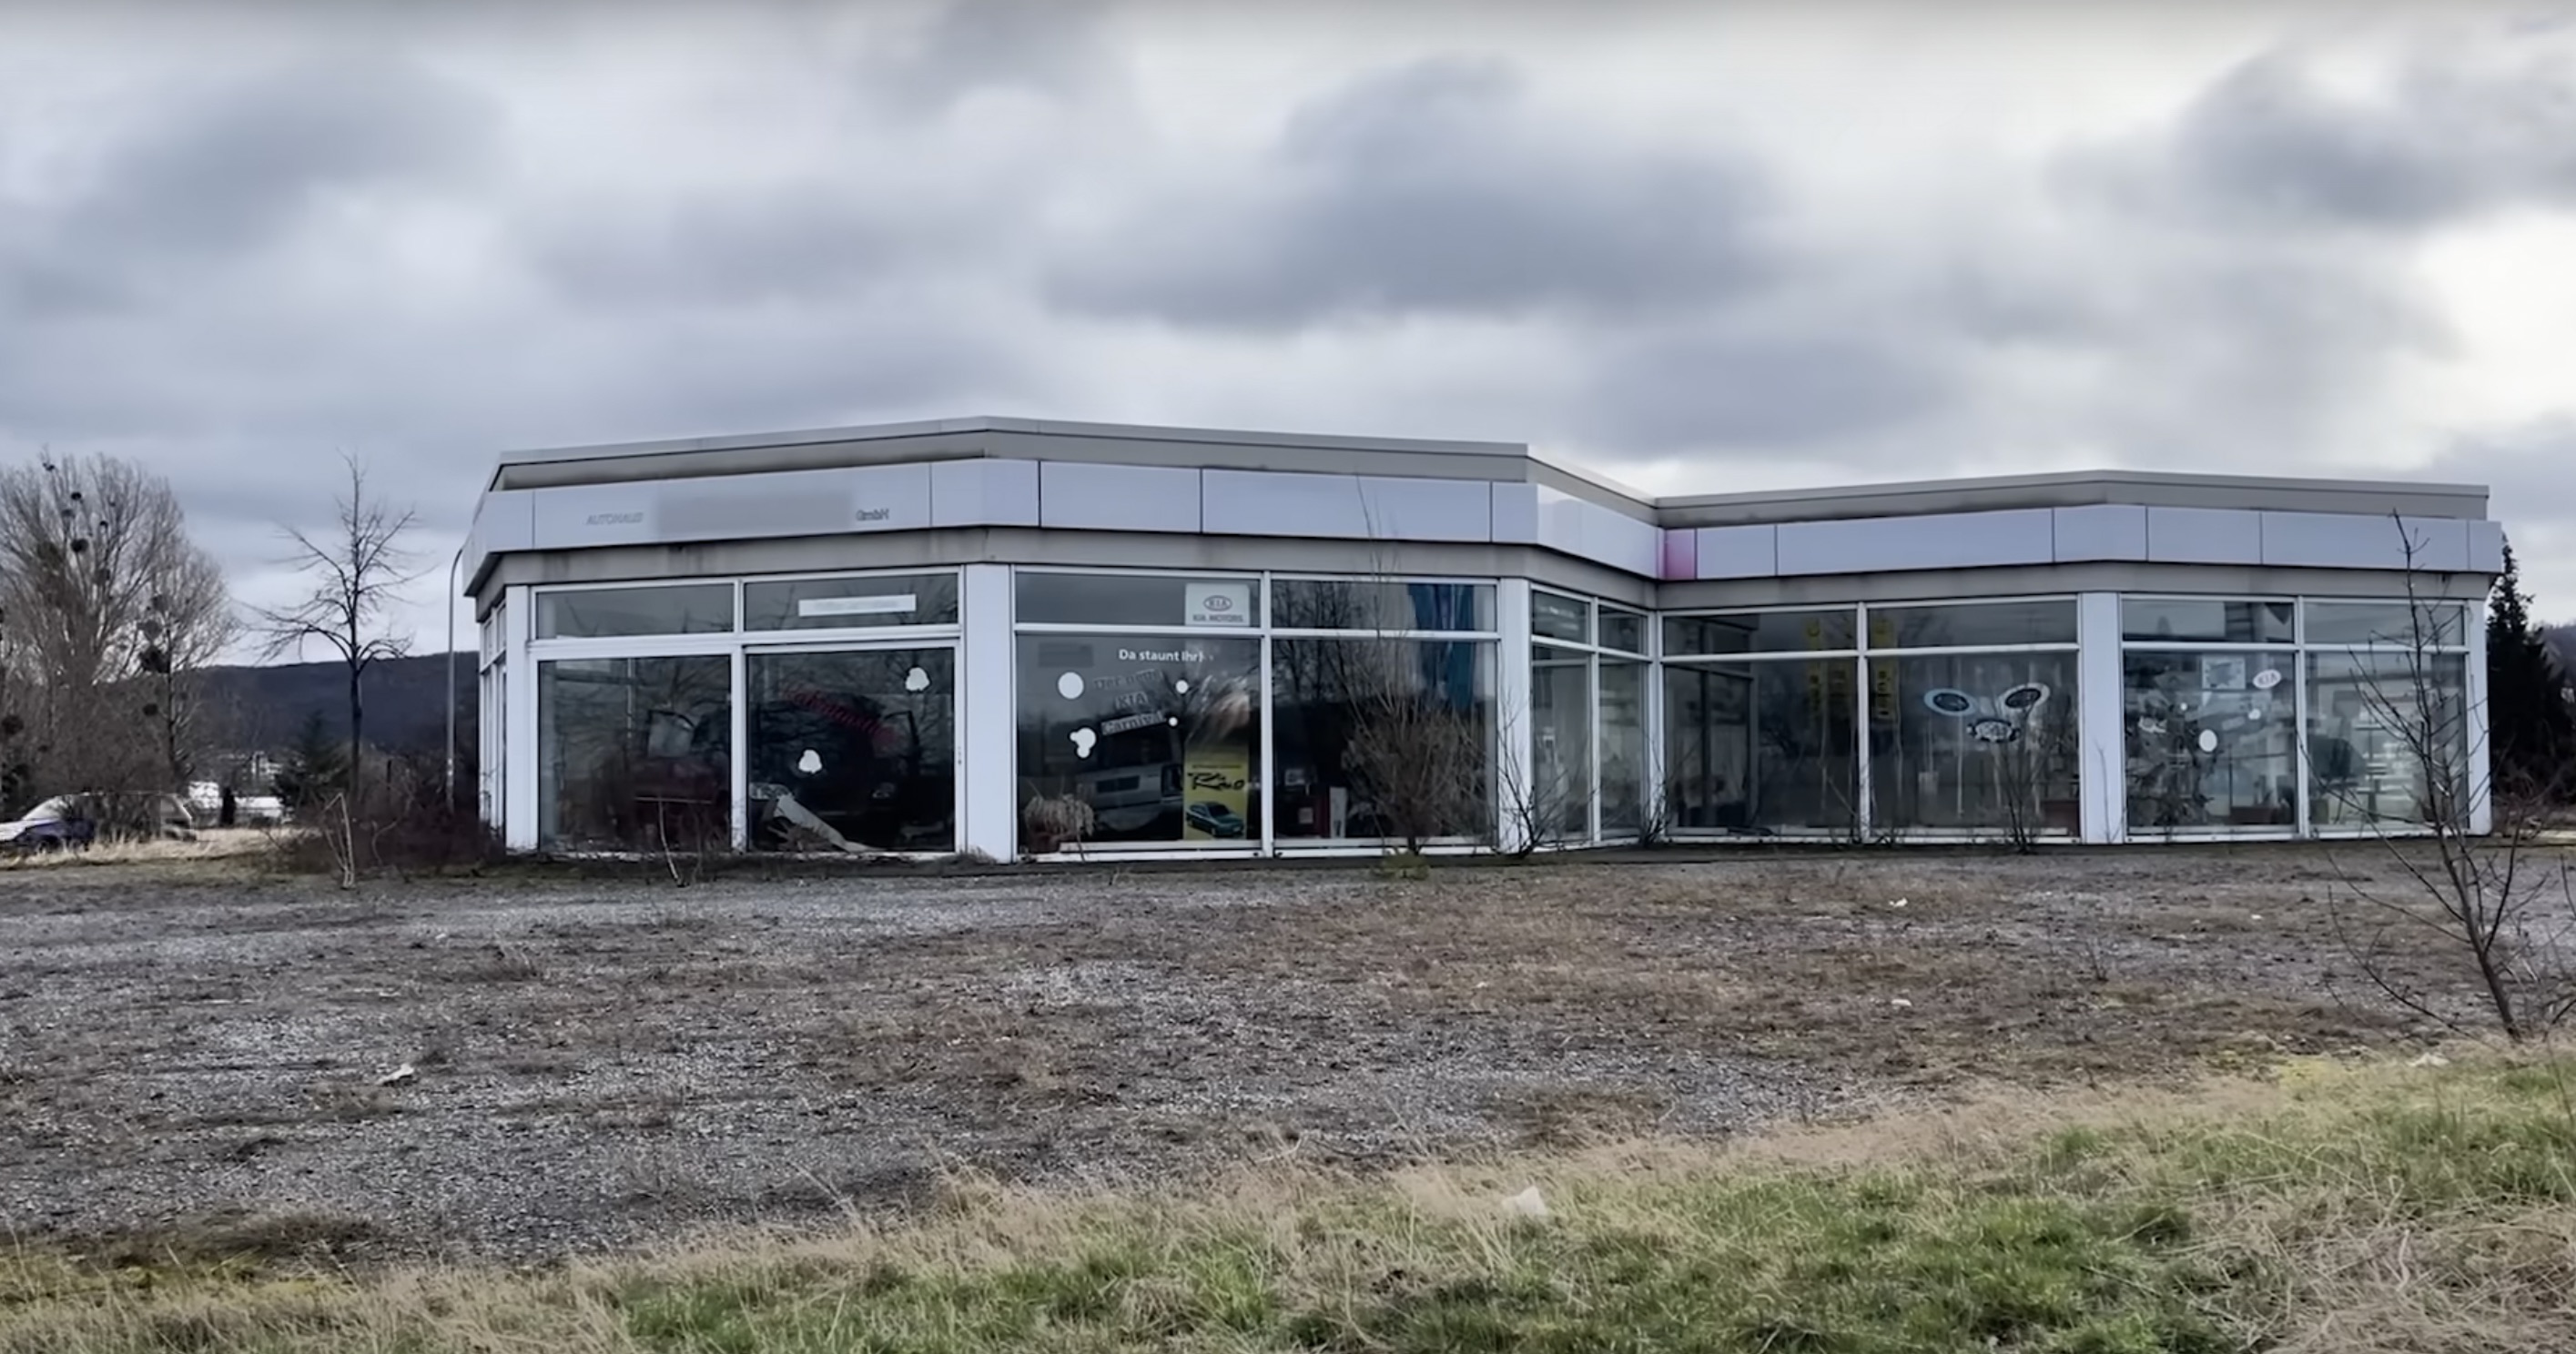 There were abandoned cars in both the dealership's showroom as well as numerous workshops